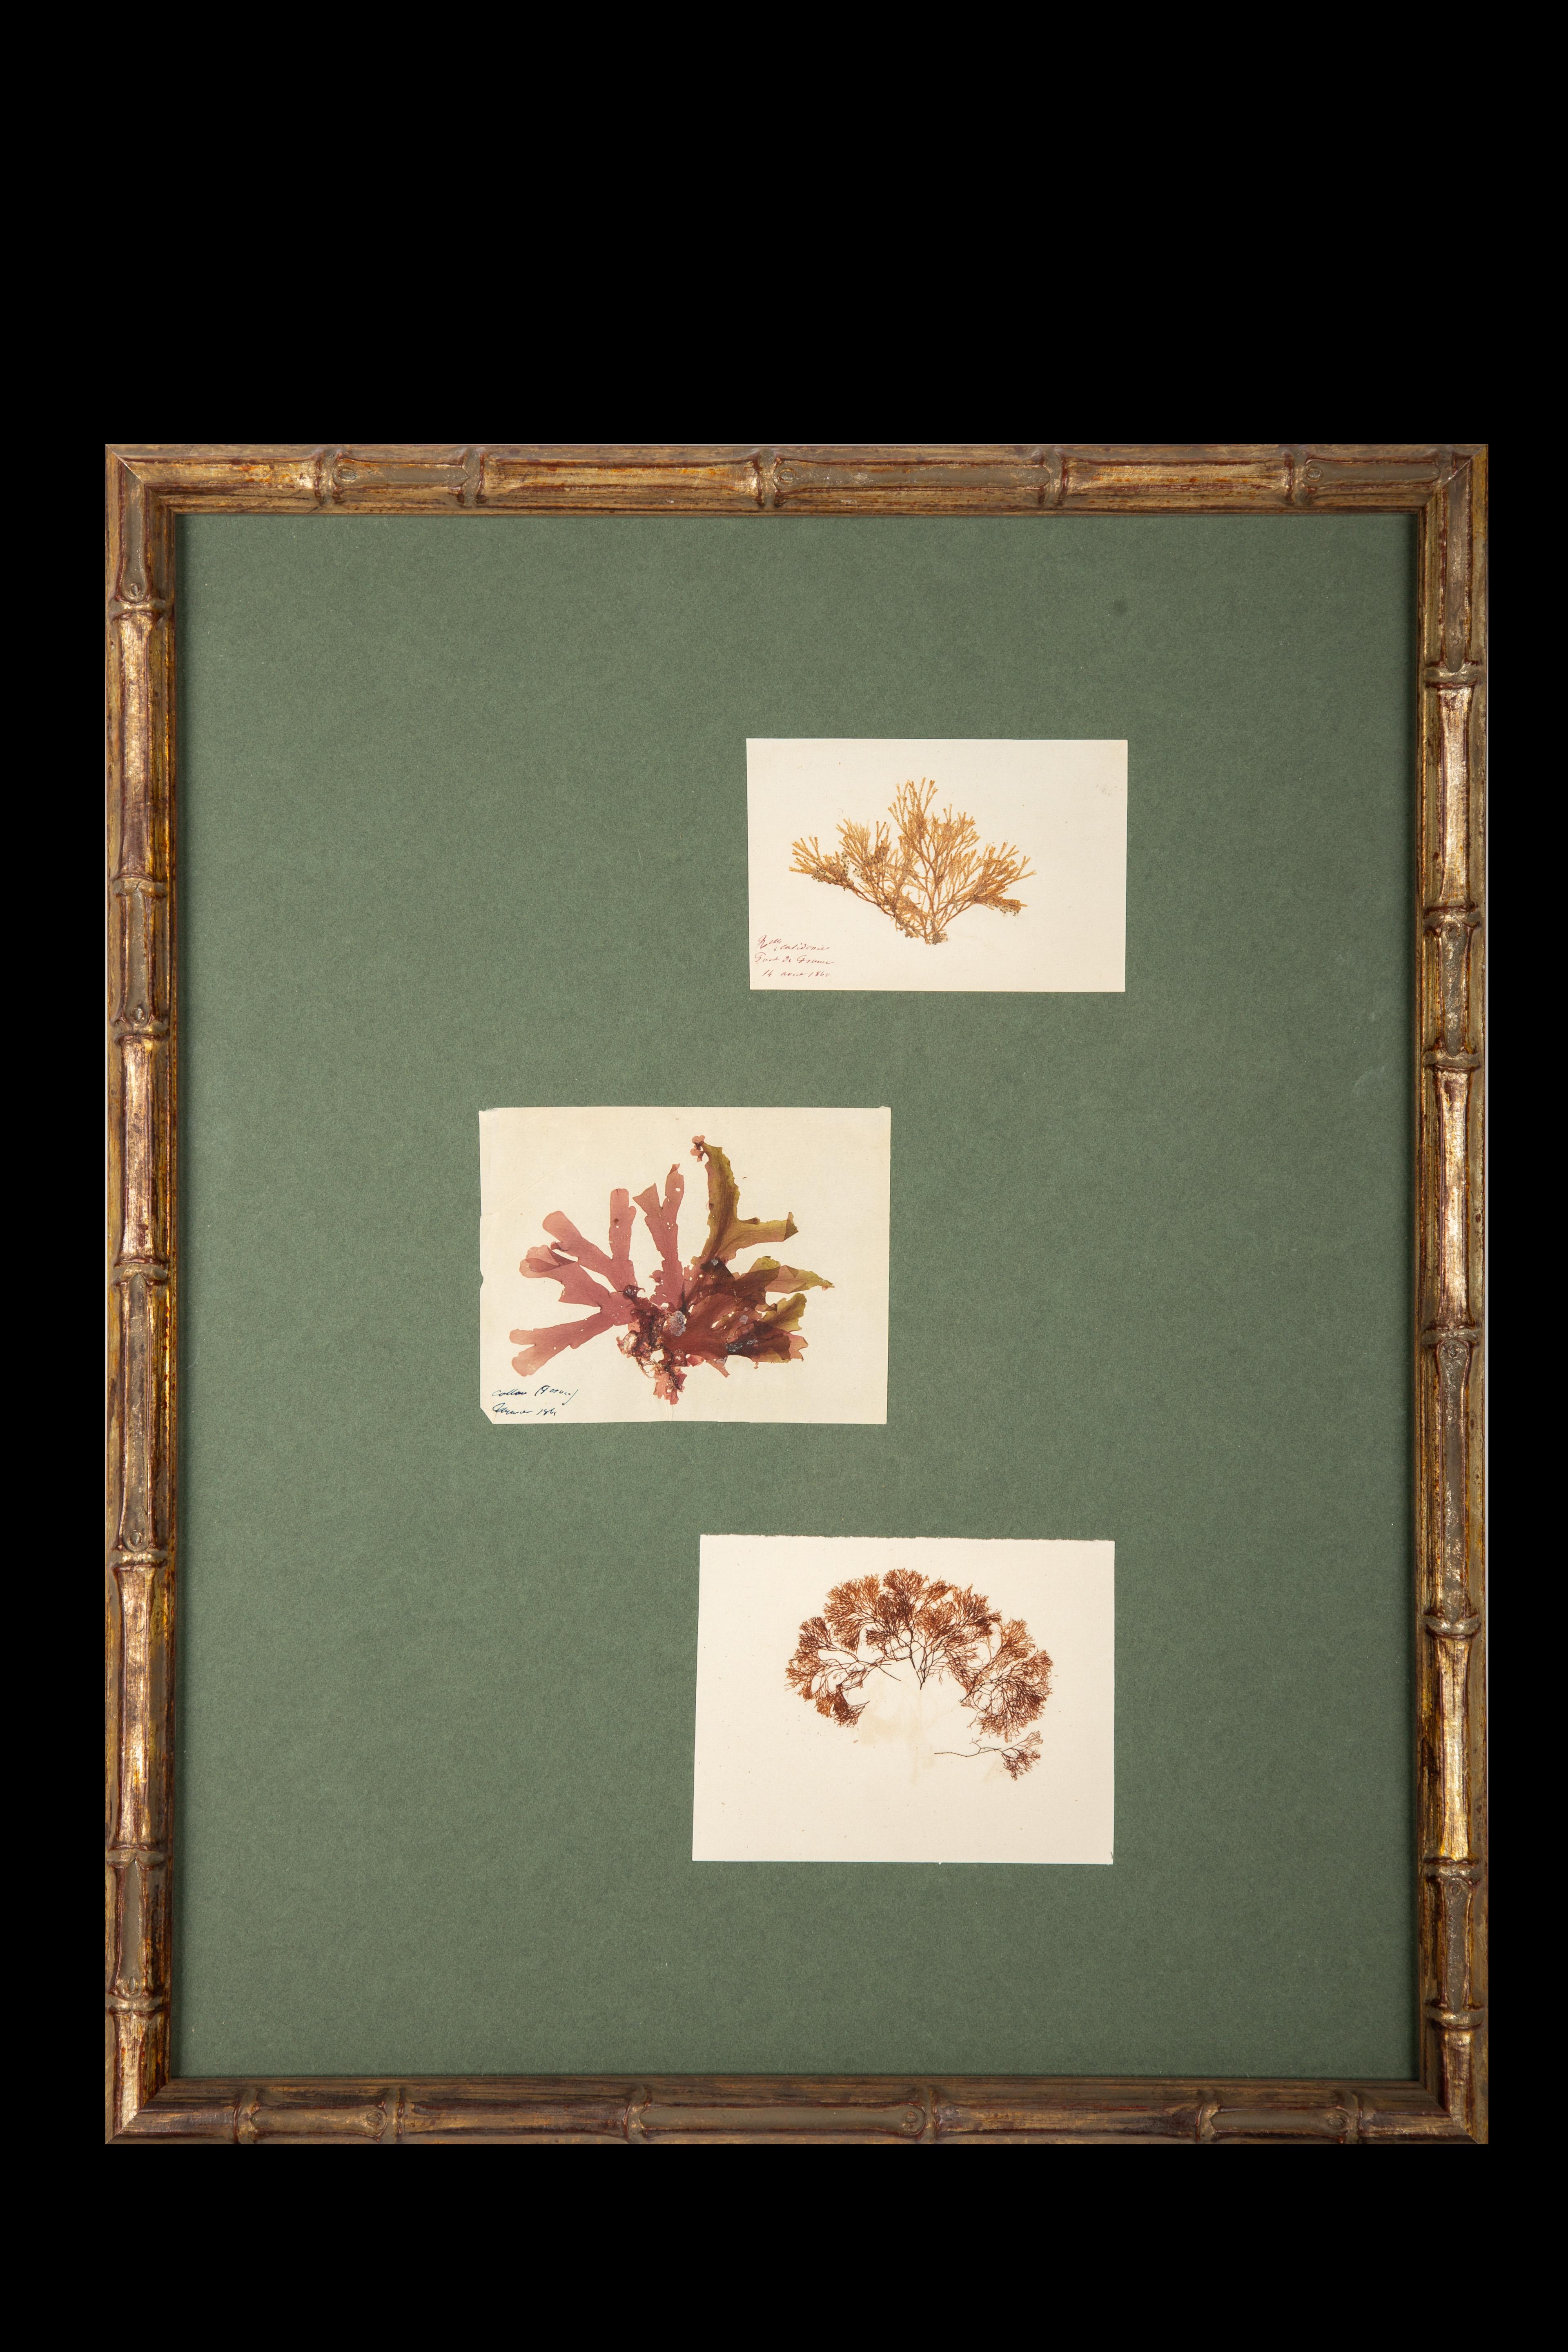 Framed and Pressed French Alguier Specimens from the 19th Century 1